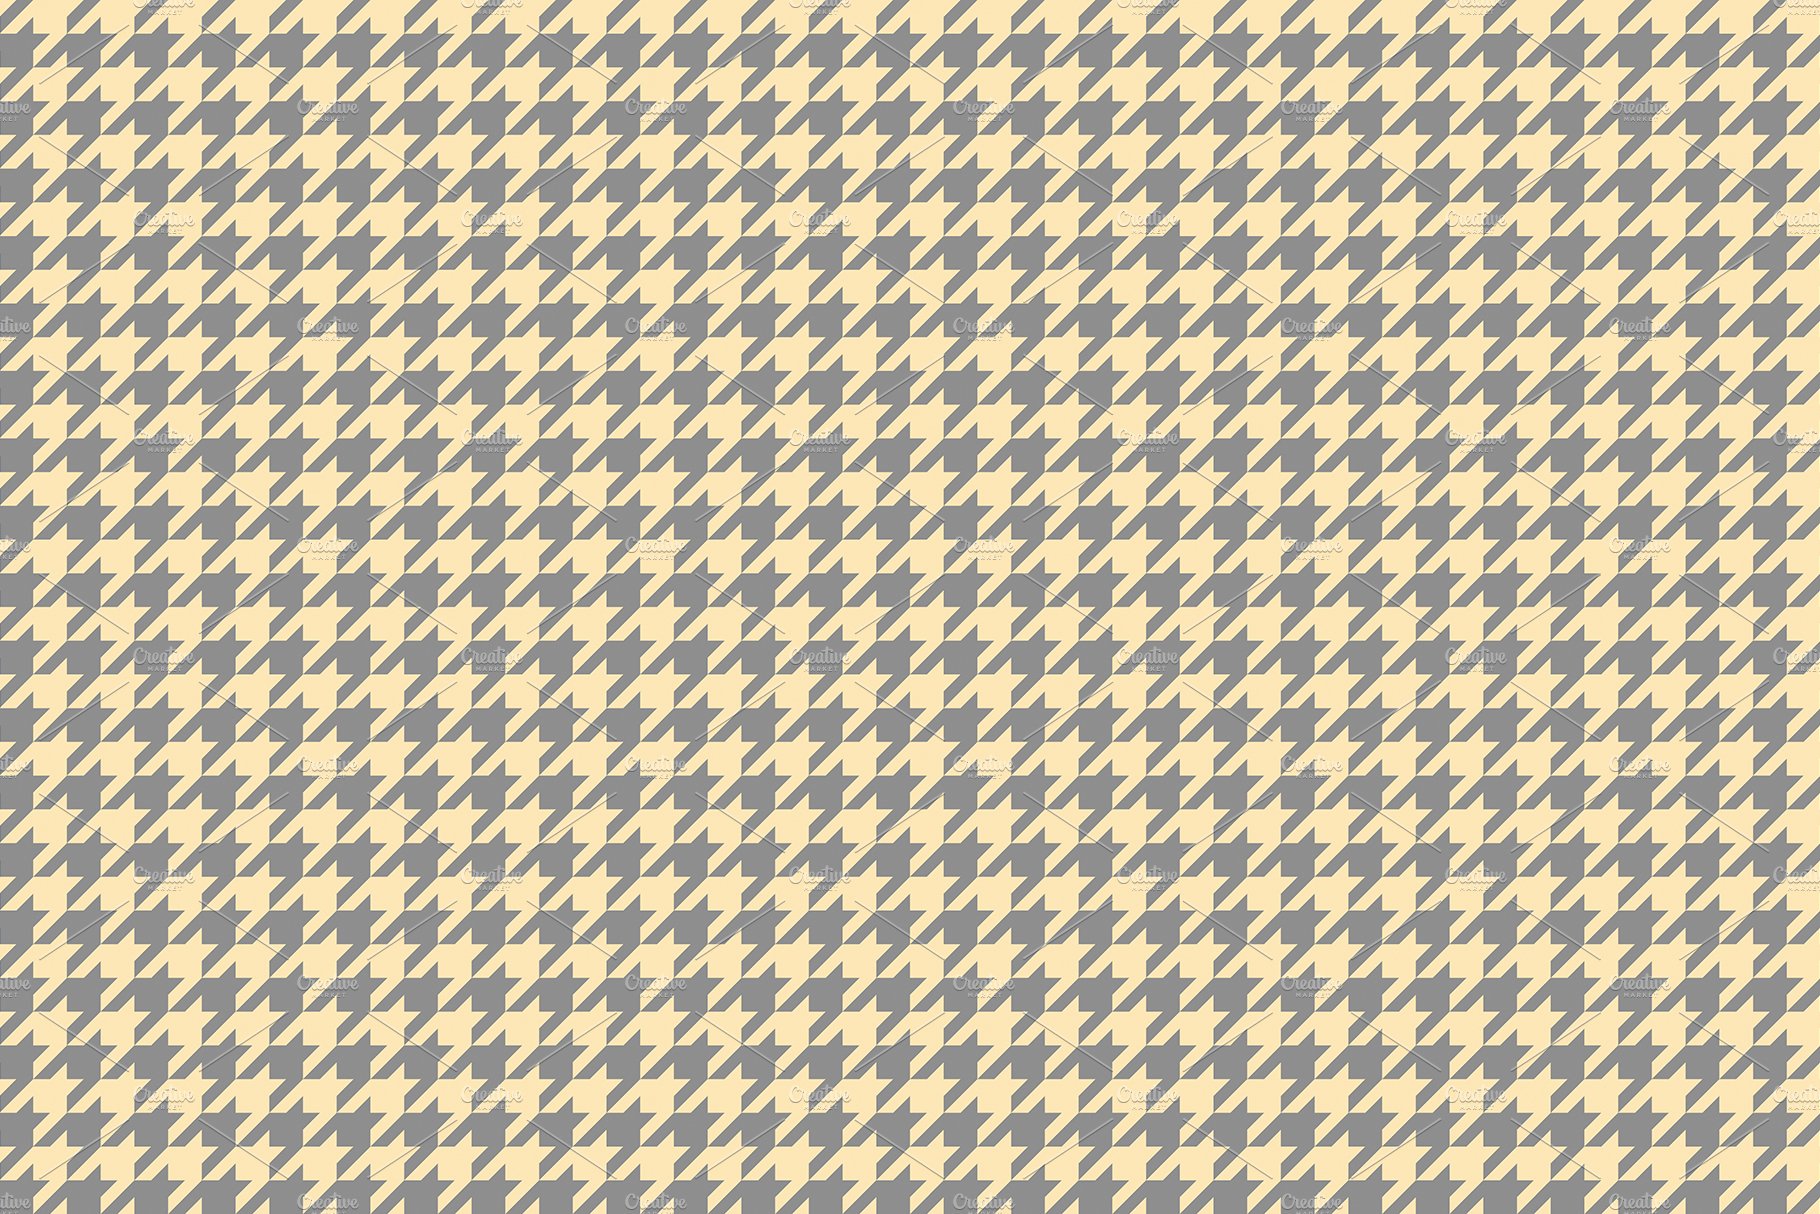 6 houndstooth pattern background texture copy 841